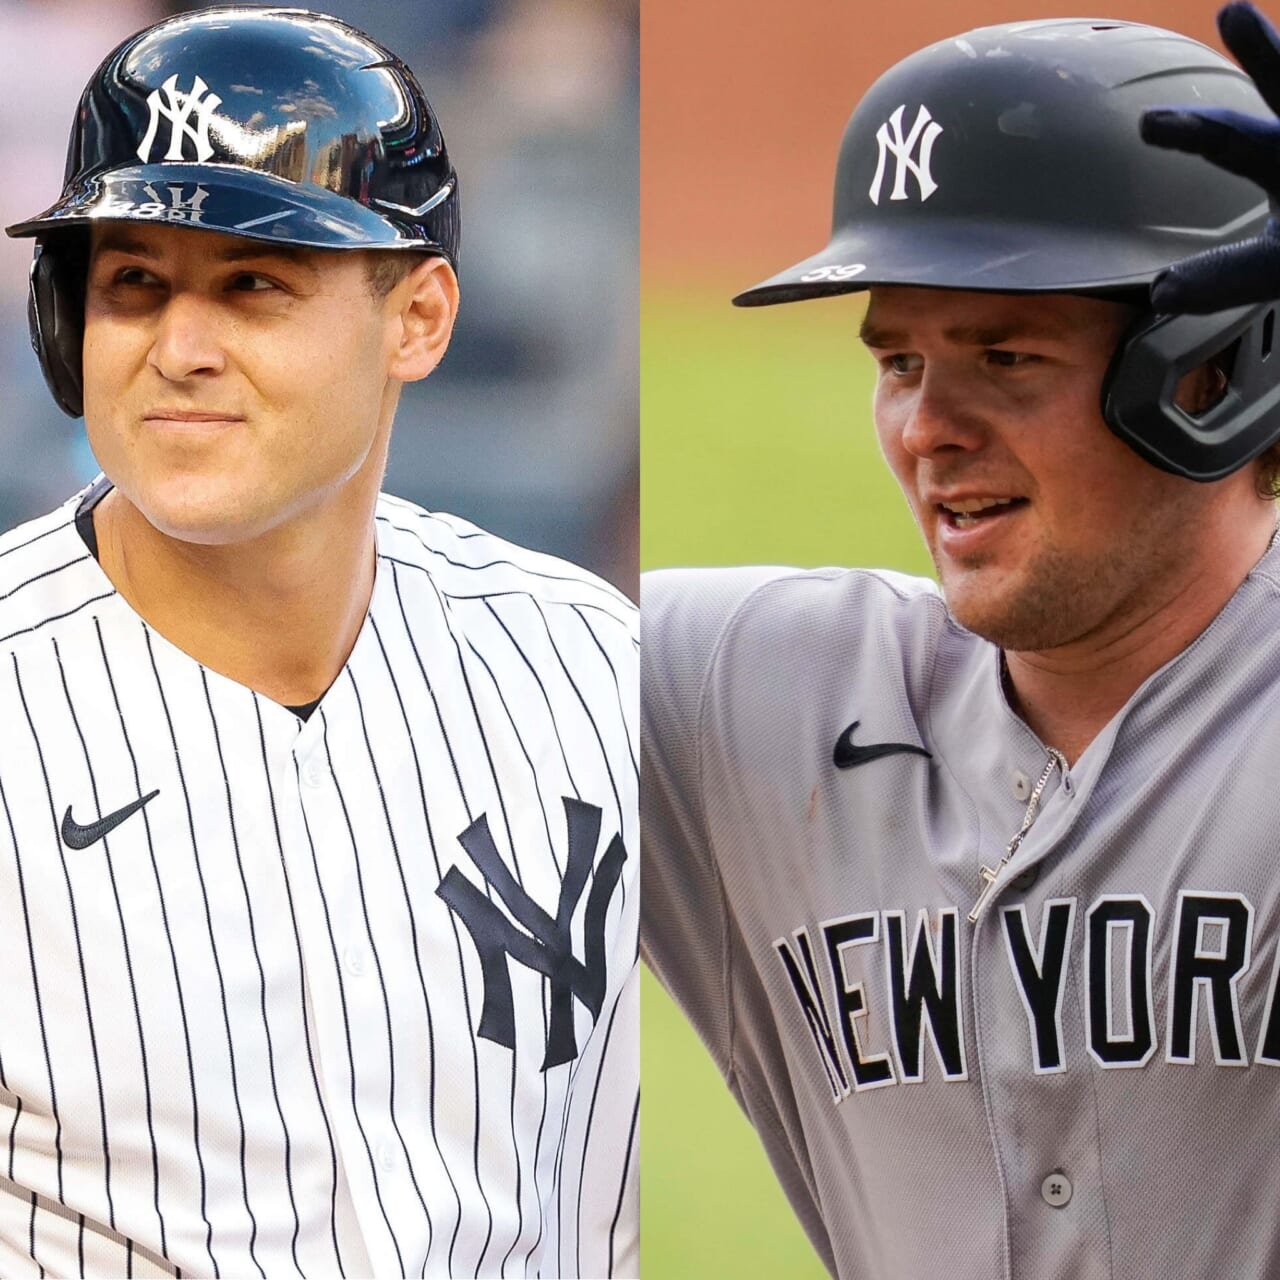 The New York Yankees need to play Anthony Rizzo and Luke Voit moving forward